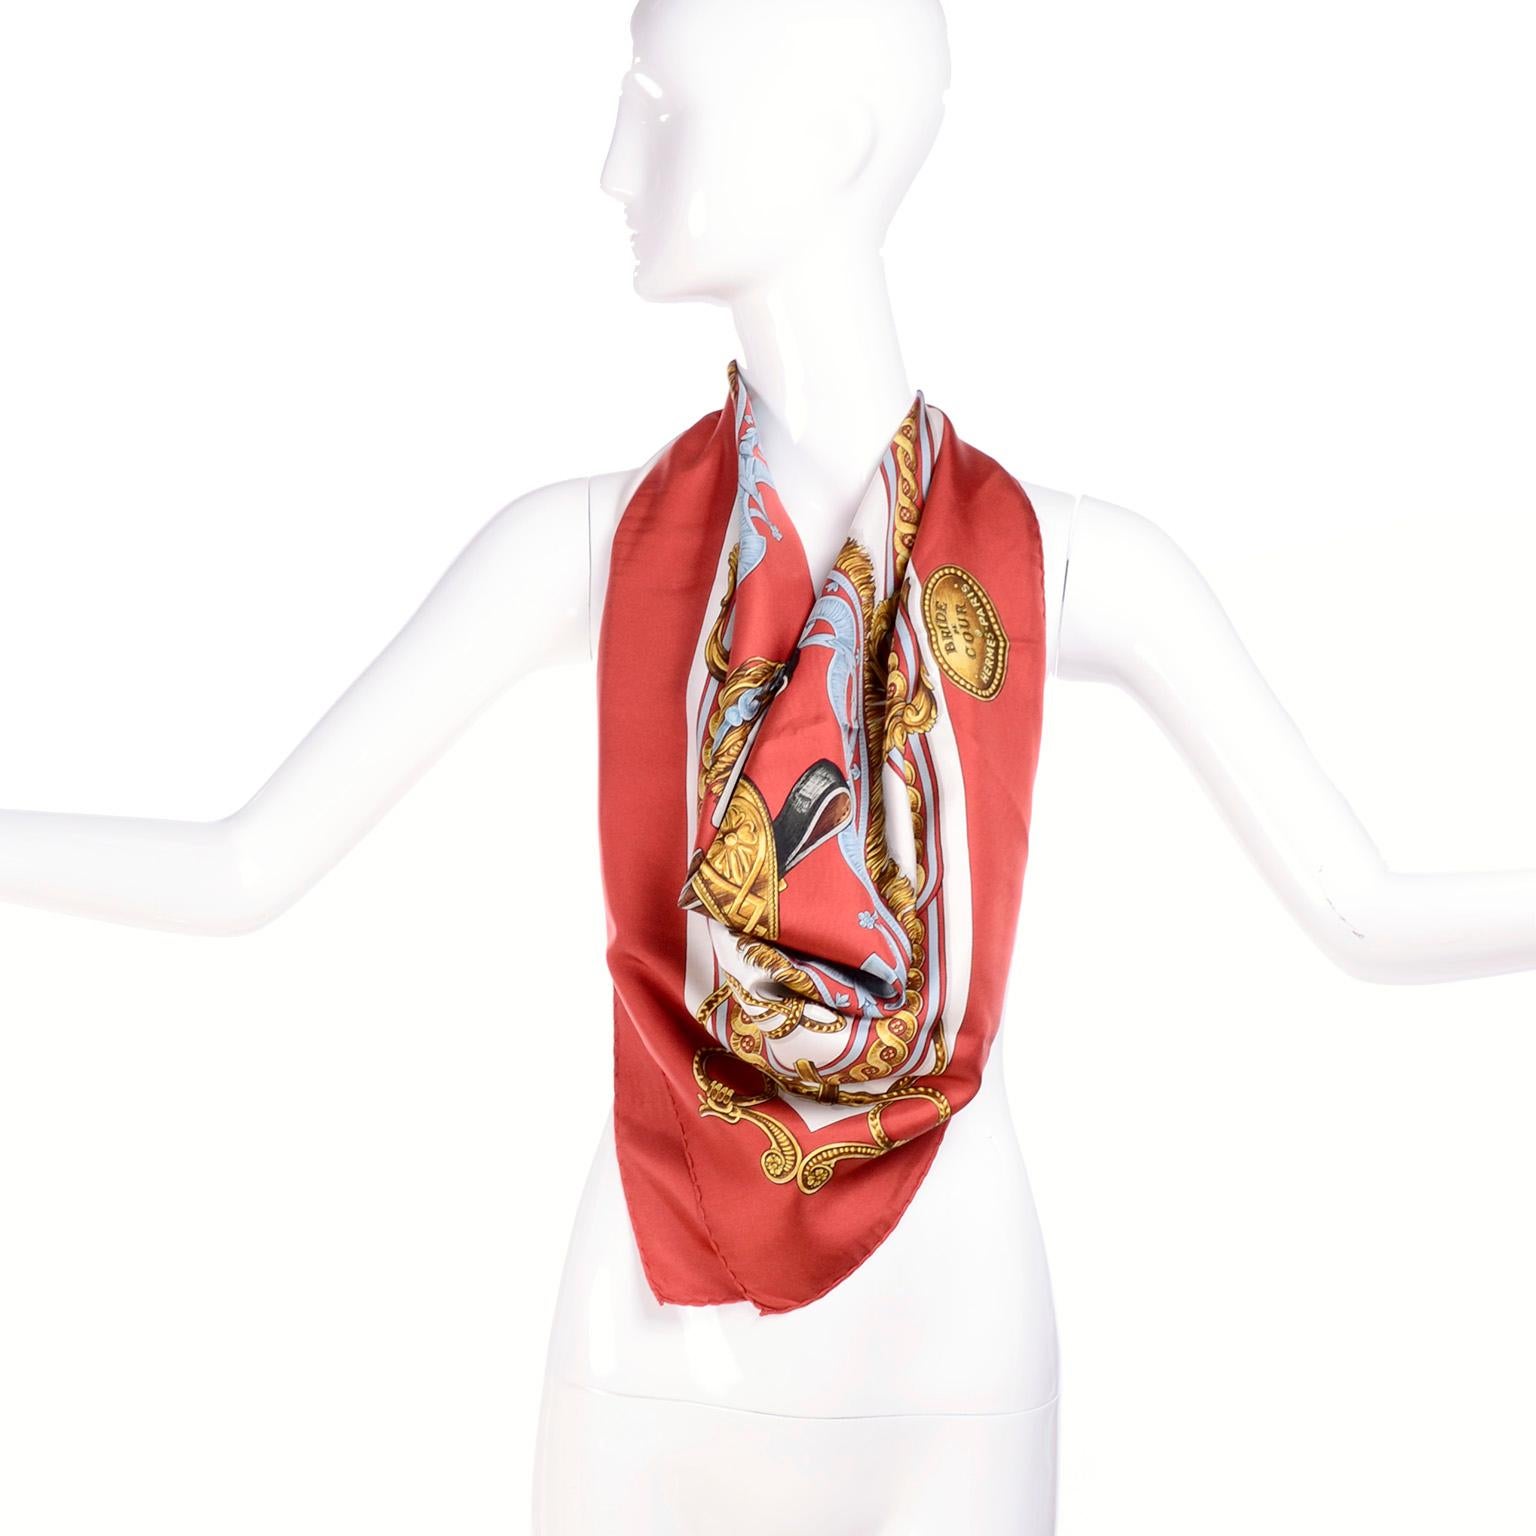 This beautiful vintage Hermes equestrian scarf was originally designed by Francoise de la Perriere in 1969. The scarf is in beautiful shades of red and blue with some yellow gold and it measures 35.